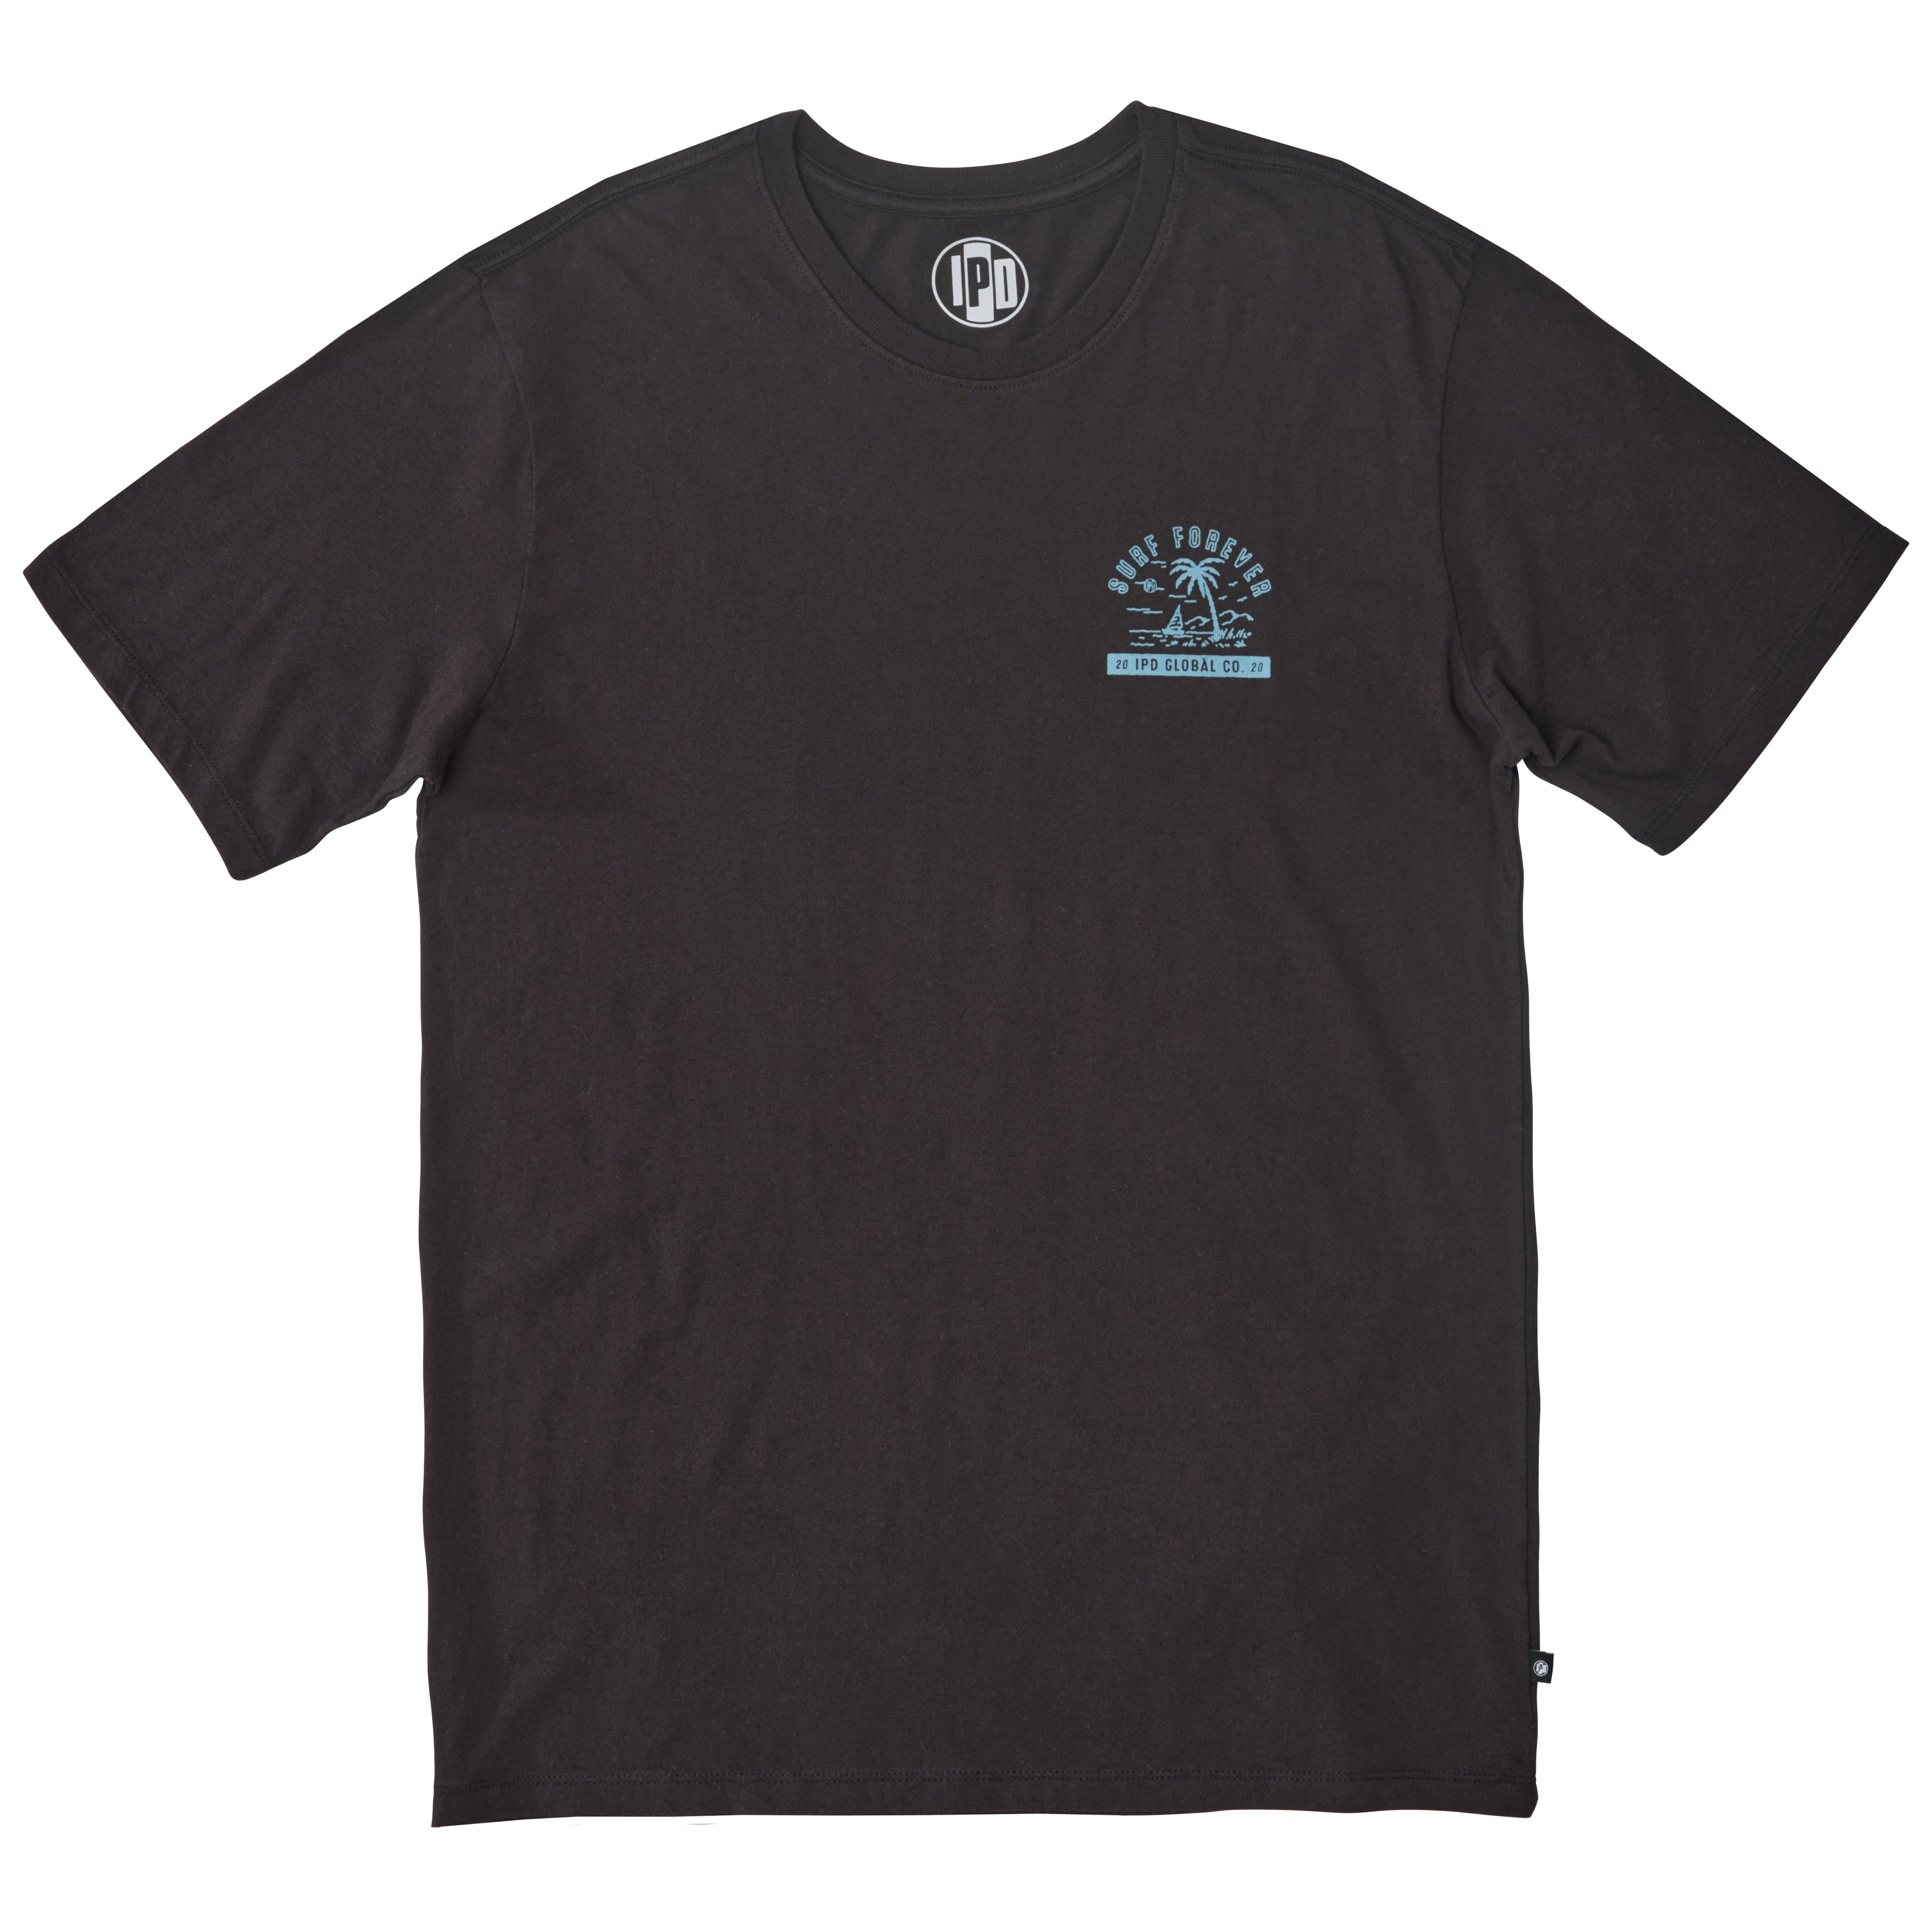 SURF FOREVER PALM SUPER SOFT TEE